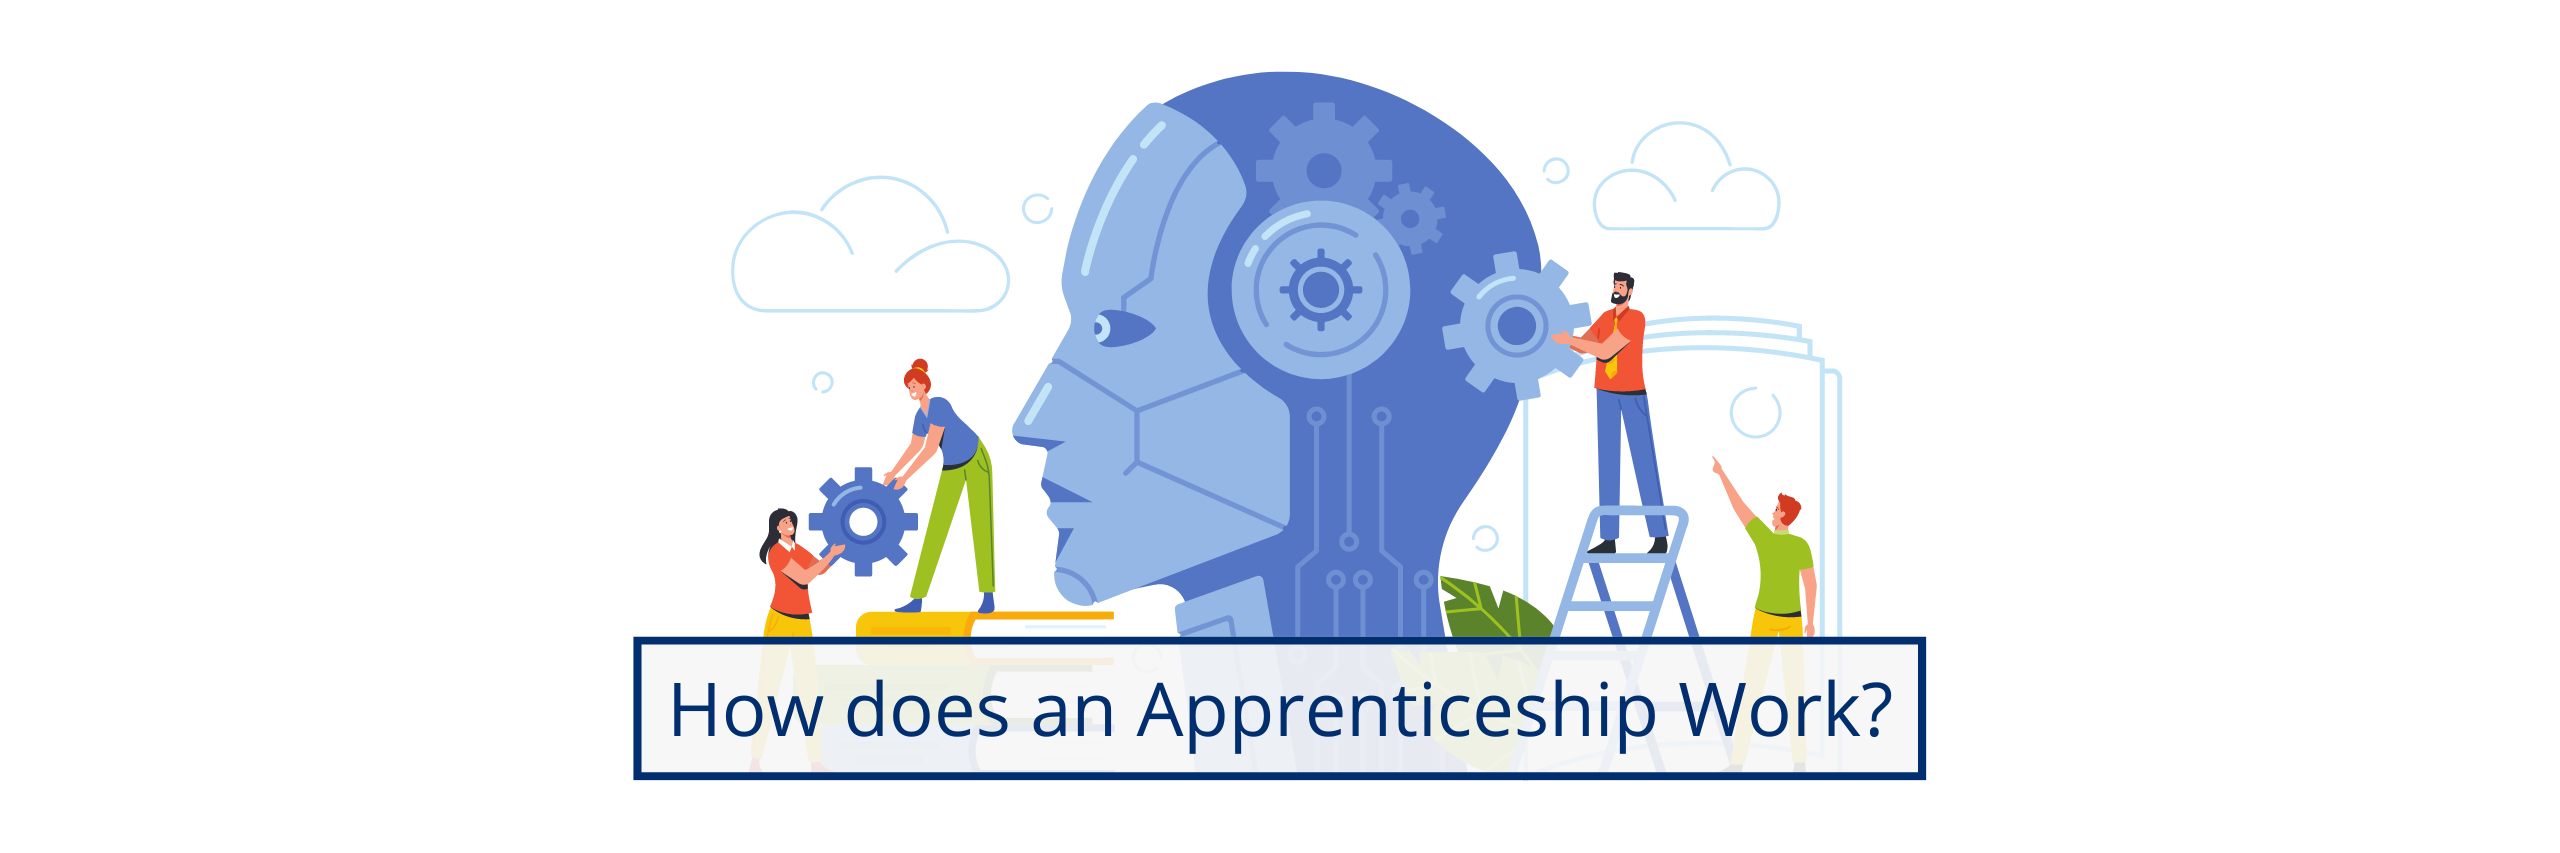 How does an apprenticeship work